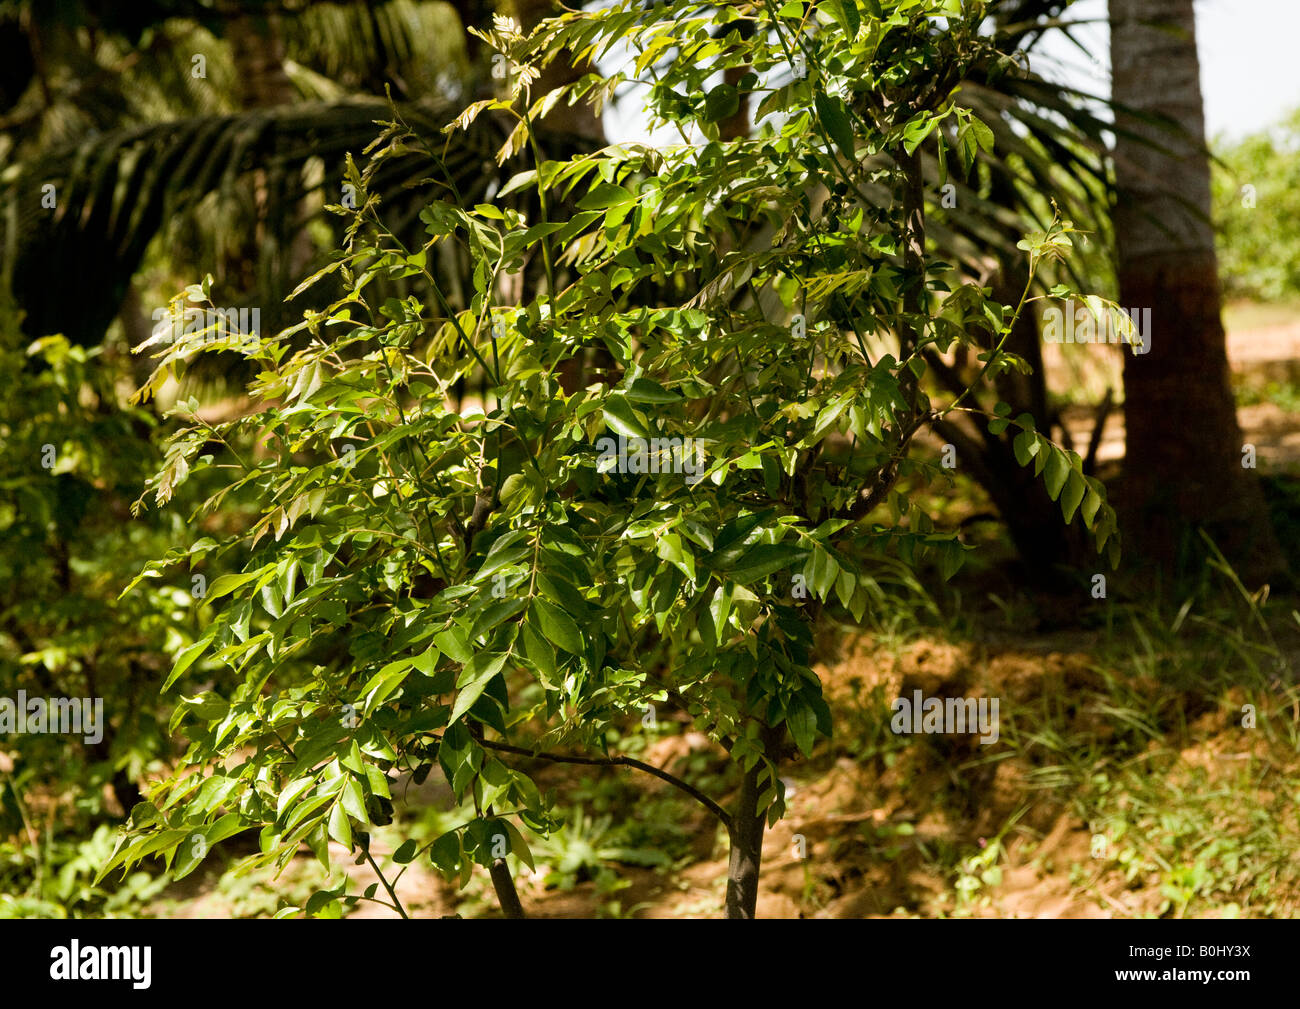 A young neem tree growing in a farm with other crops - neem trees are planted alongside the roads and walkways to provide shade. Stock Photo